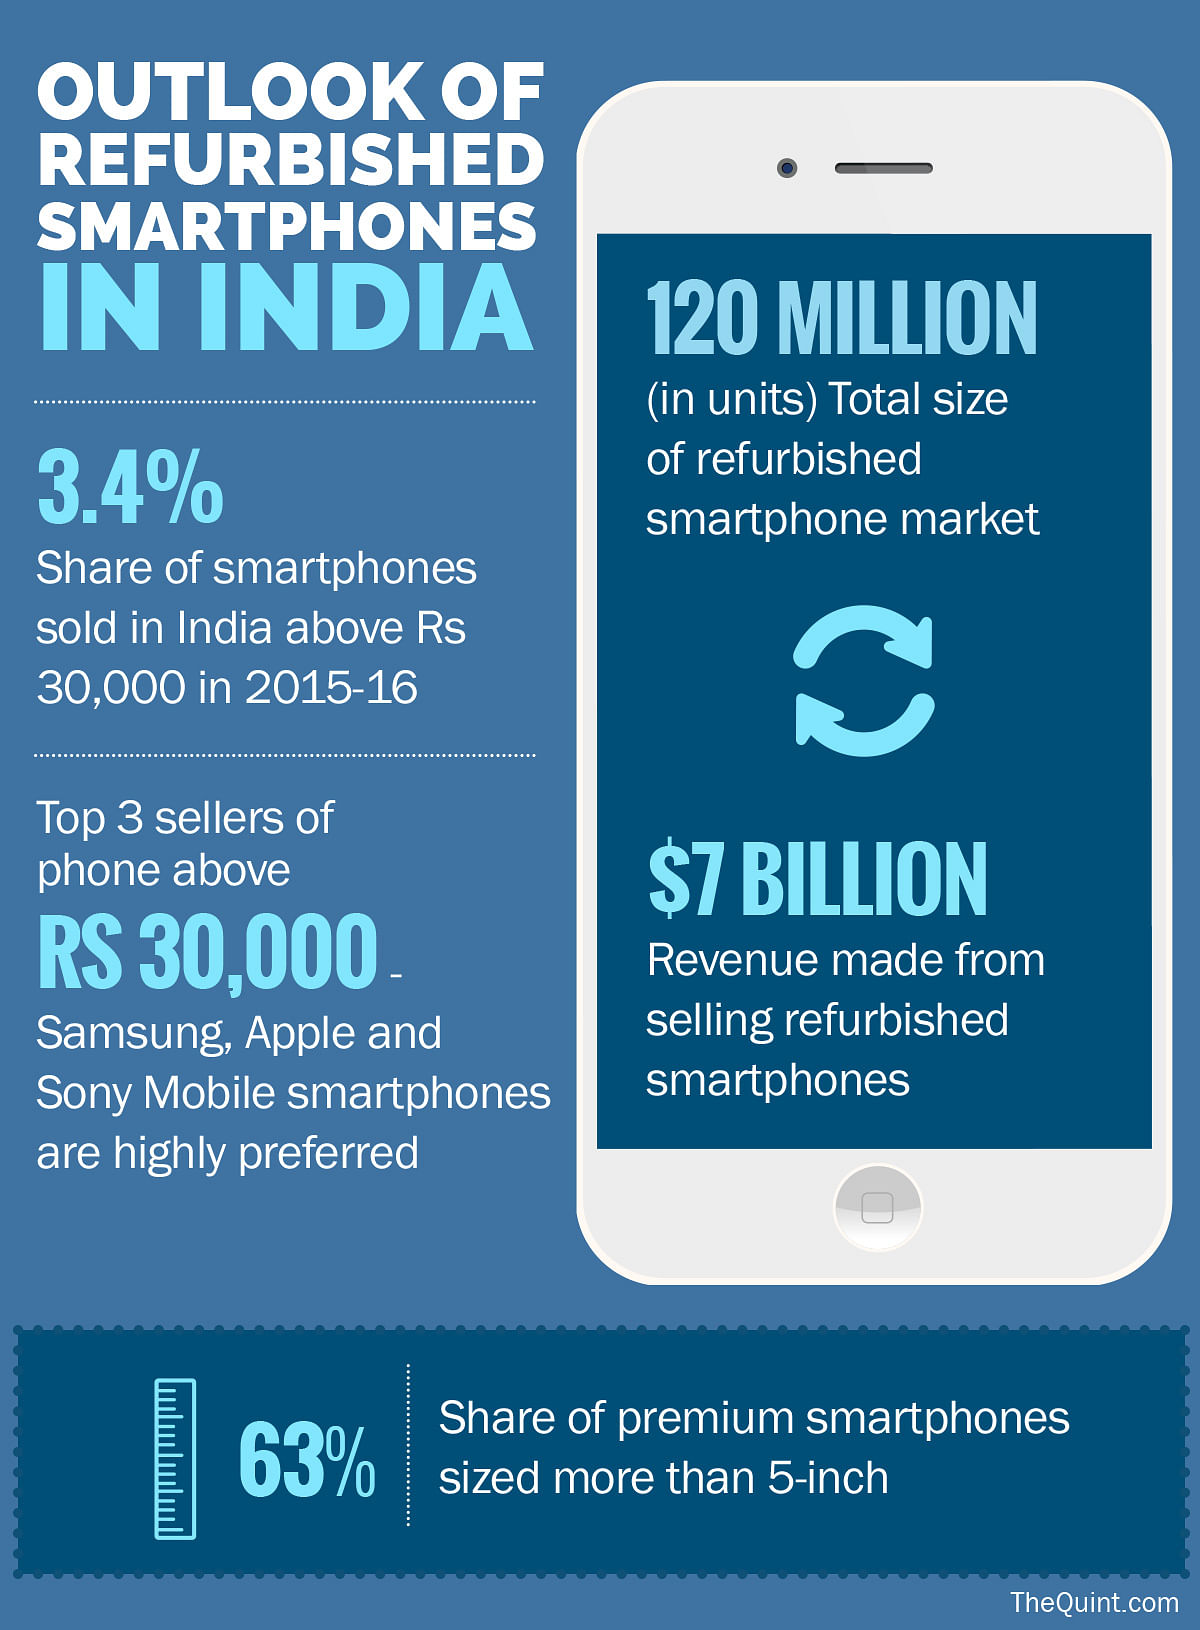 Apple wants to sell its refurbished iPhone in India, and we see if the Indian market is ready for it. 